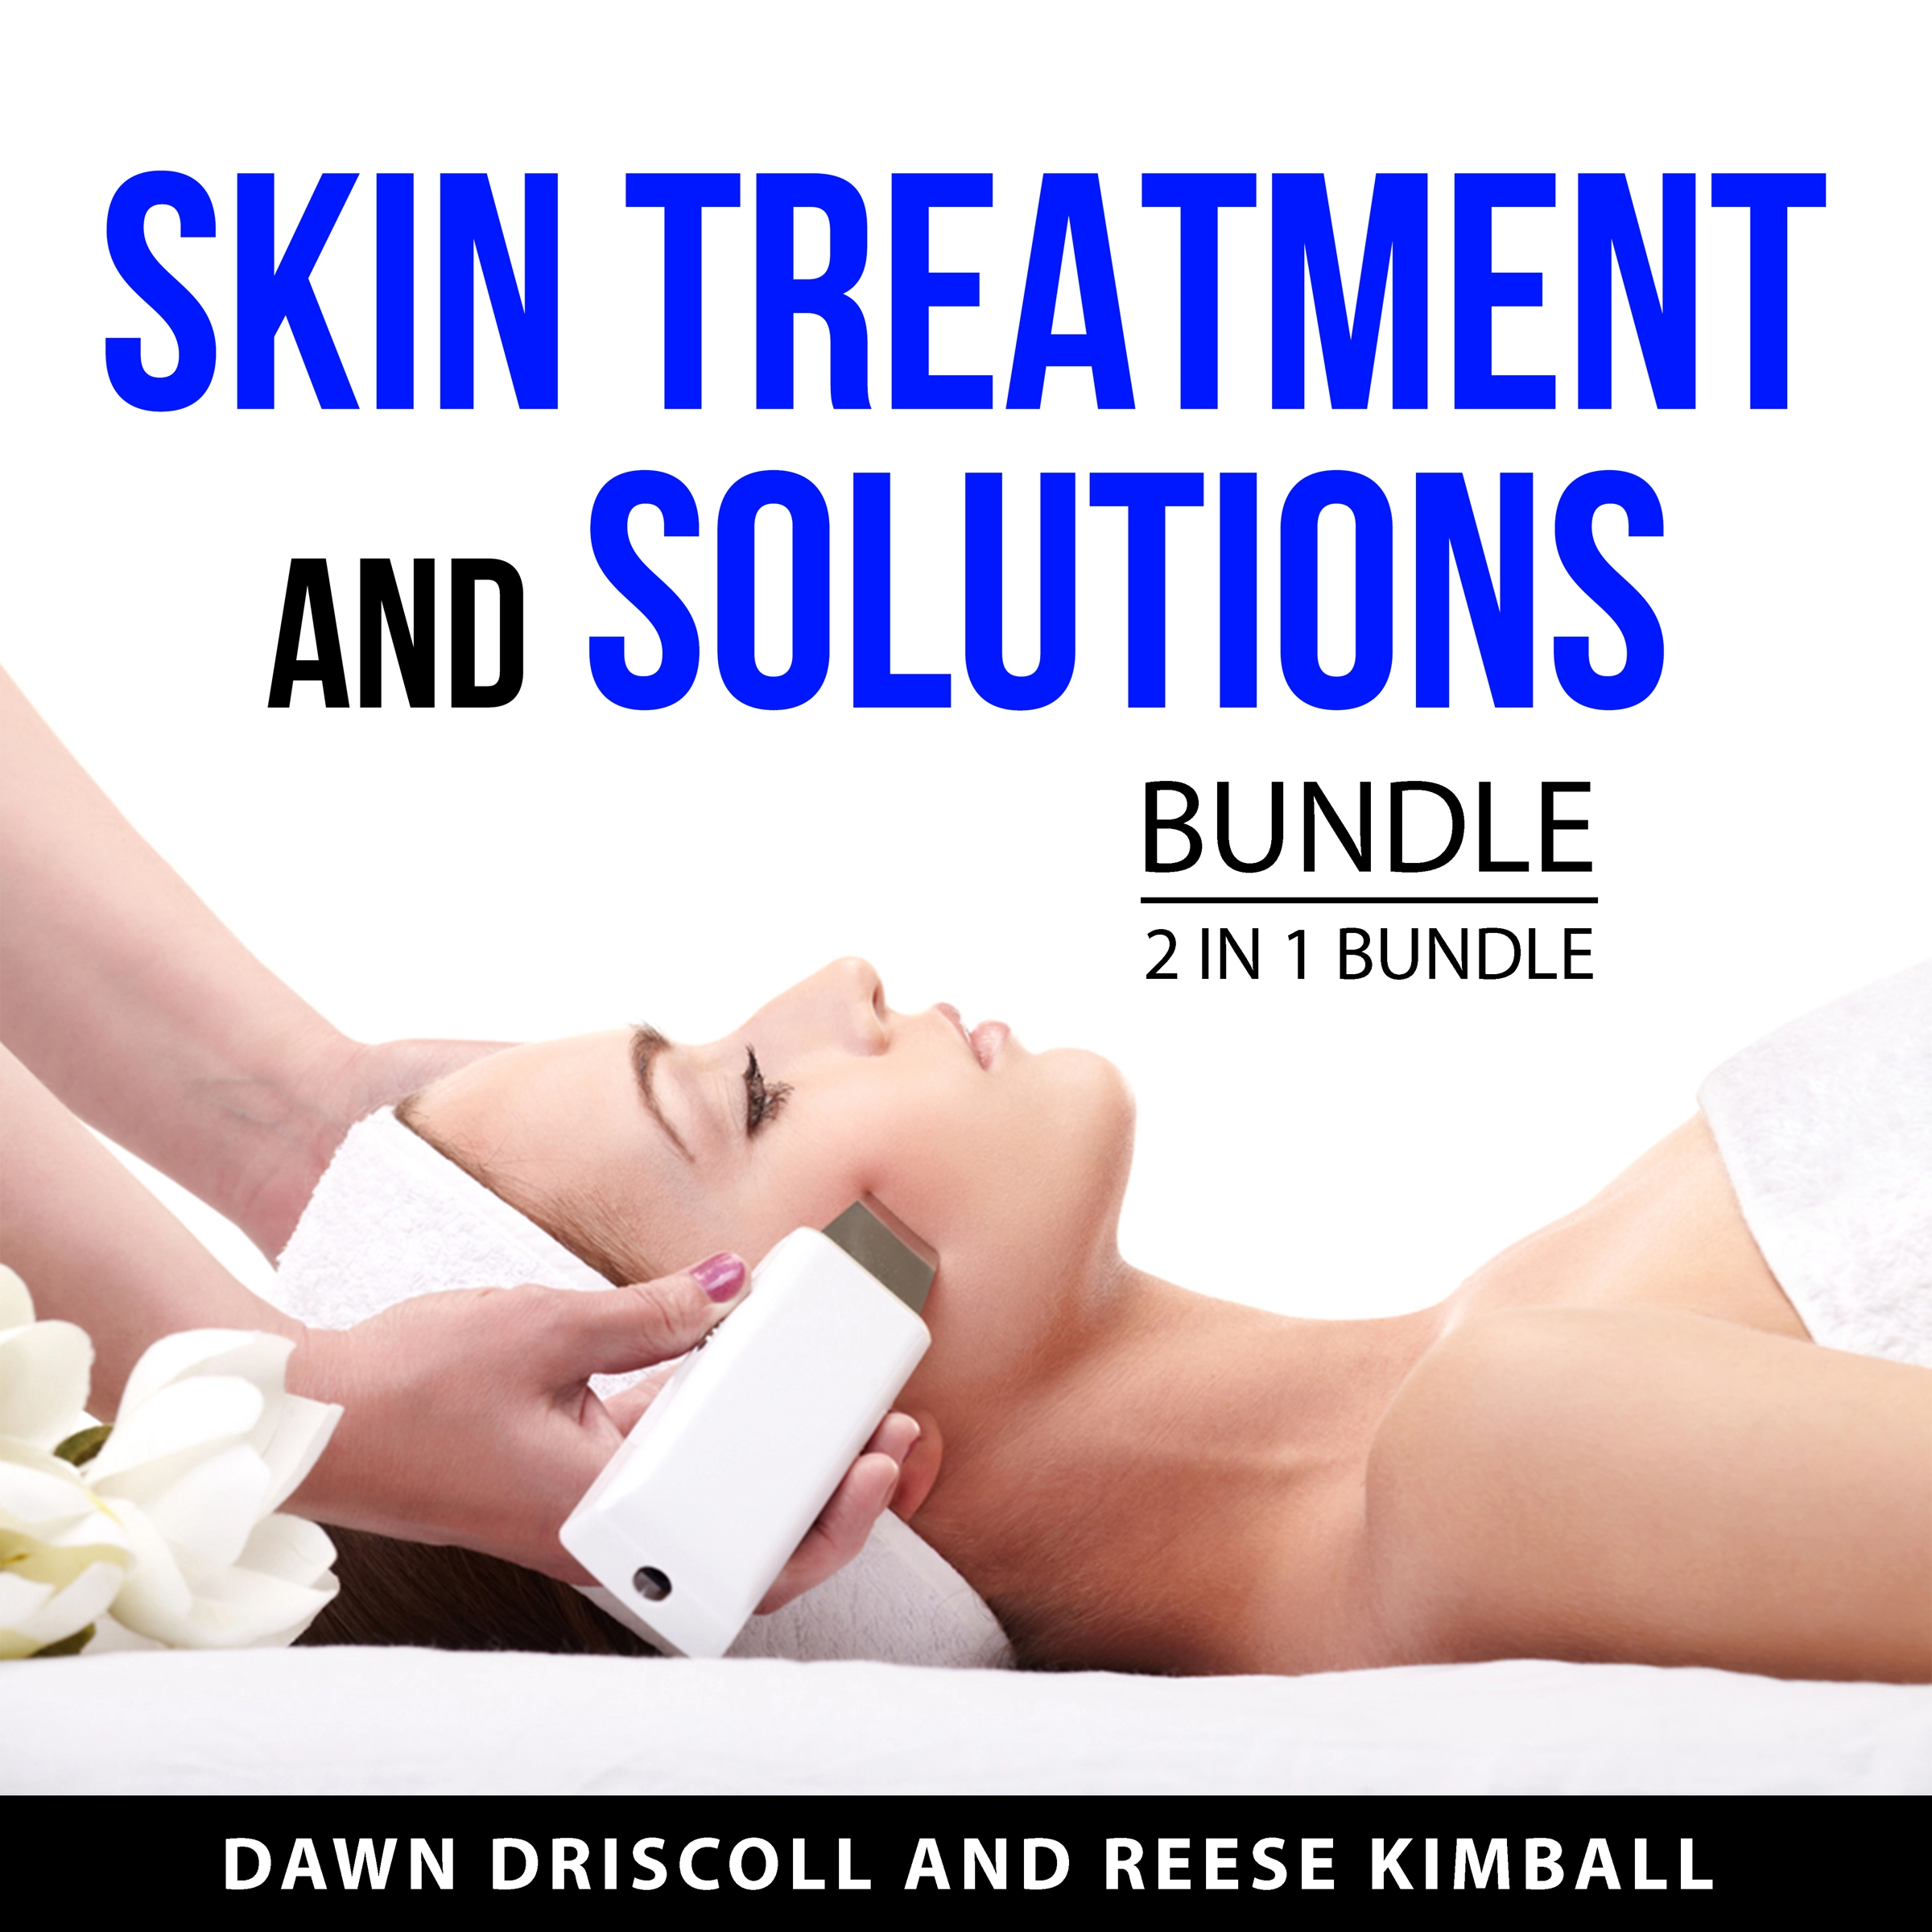 Skin Treatment and Solutions Bundle, 2 in 1 Bundle Audiobook by Reese Kimball